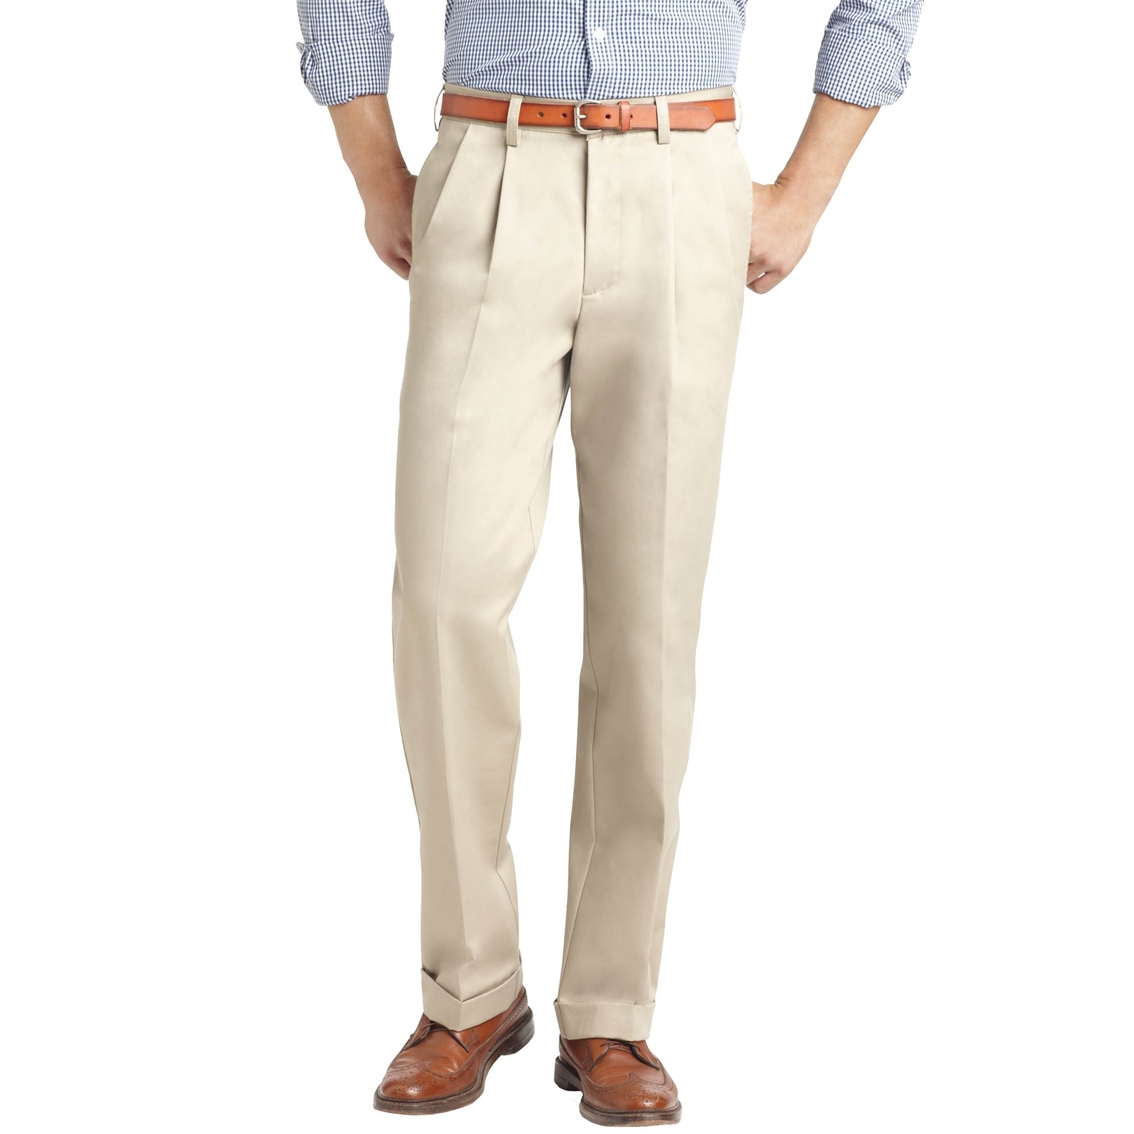 Izod Wrinkle Free Pleated Pants | Pants | Clothing & Accessories | Shop ...